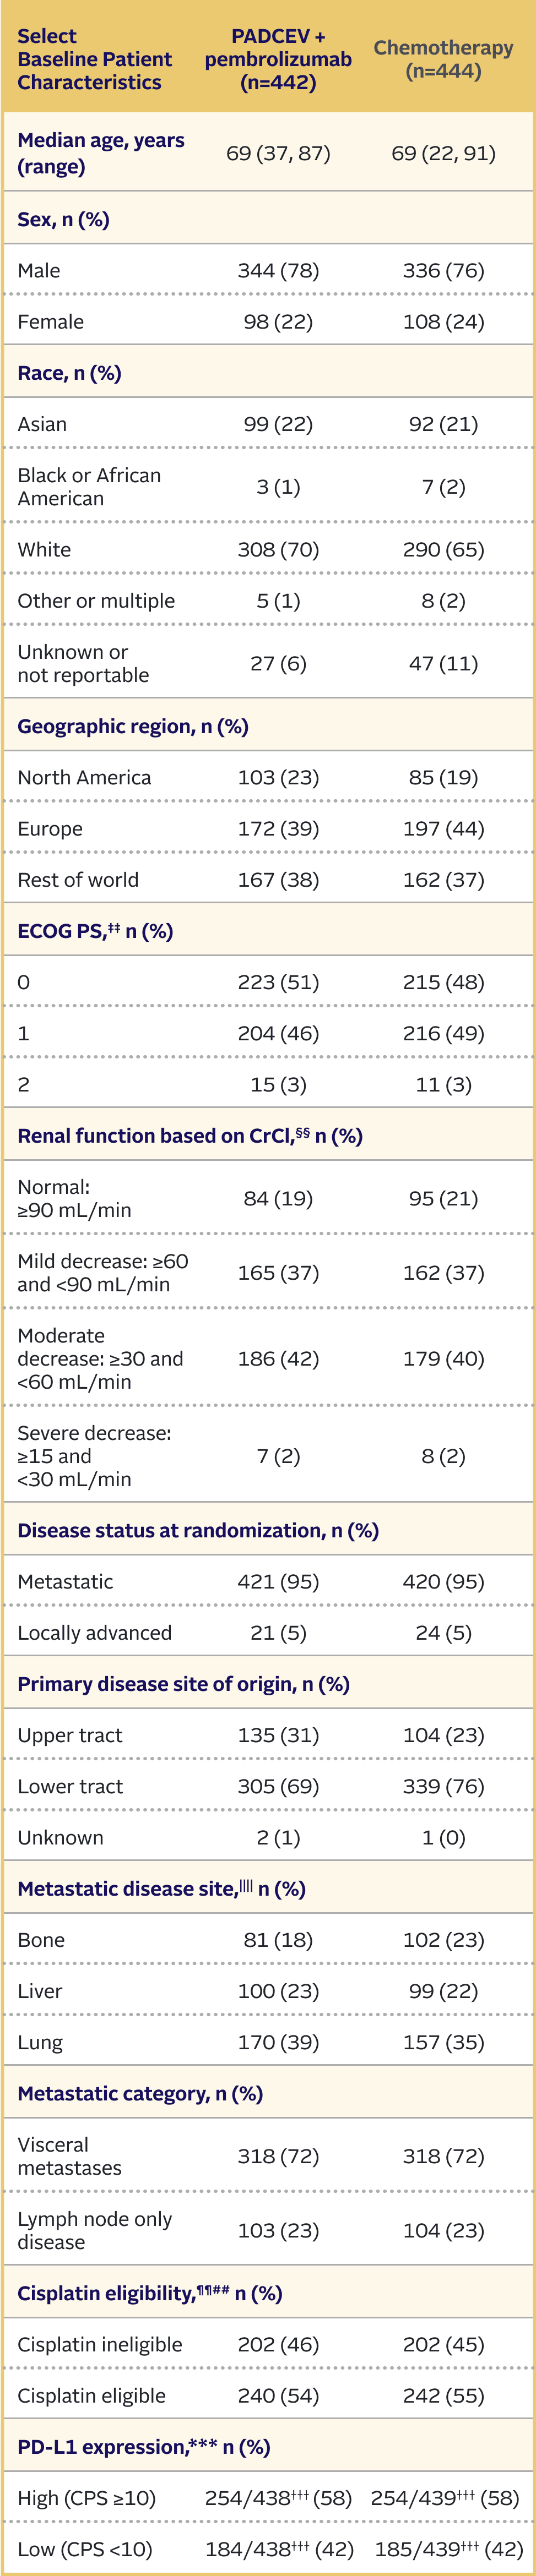 Table showing EV-302 trial baseline patient characteristics for PADCEV + pembrolizumab and chemotherapy.